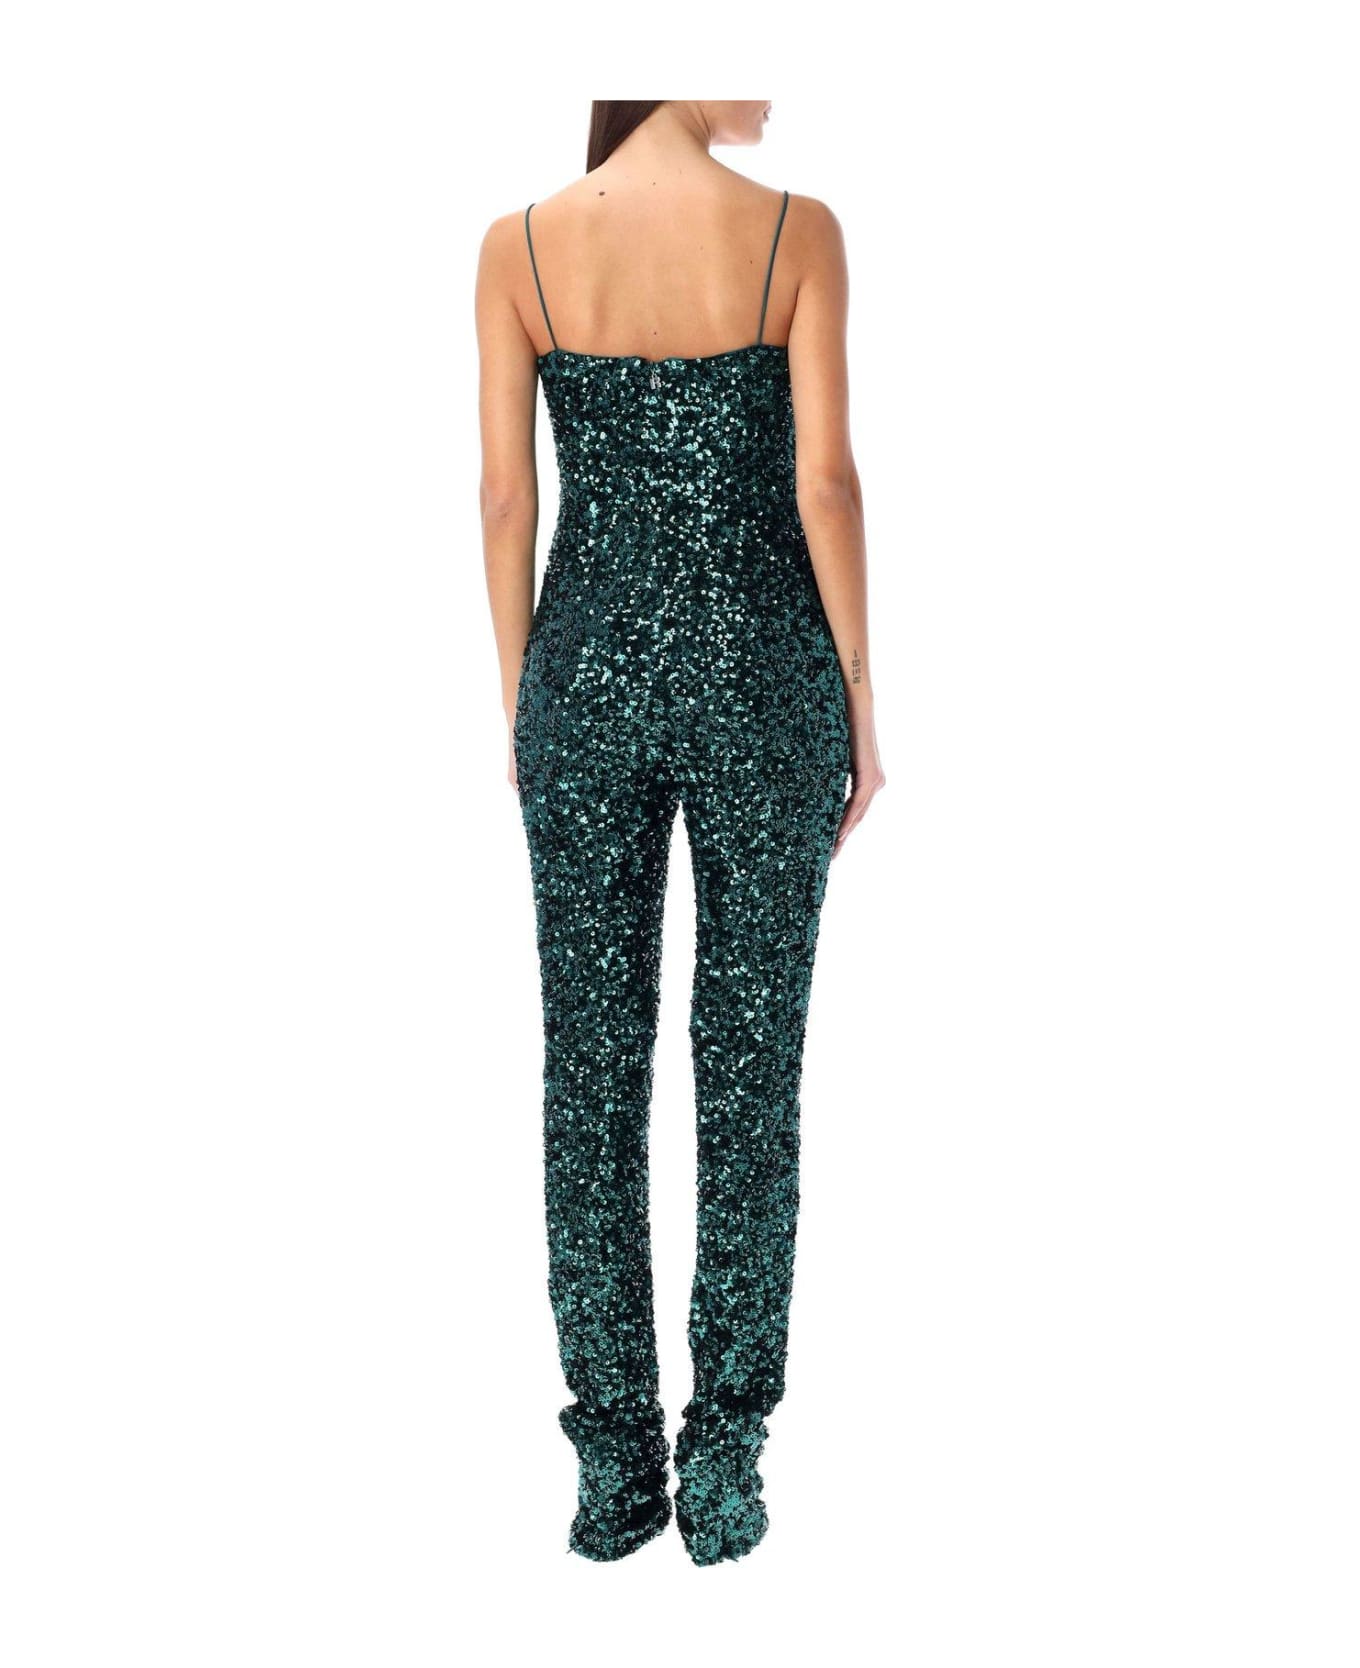 Rotate by Birger Christensen Sequin Embellished Spaghetti Straps Jumpsuit - Green ジャンプスーツ